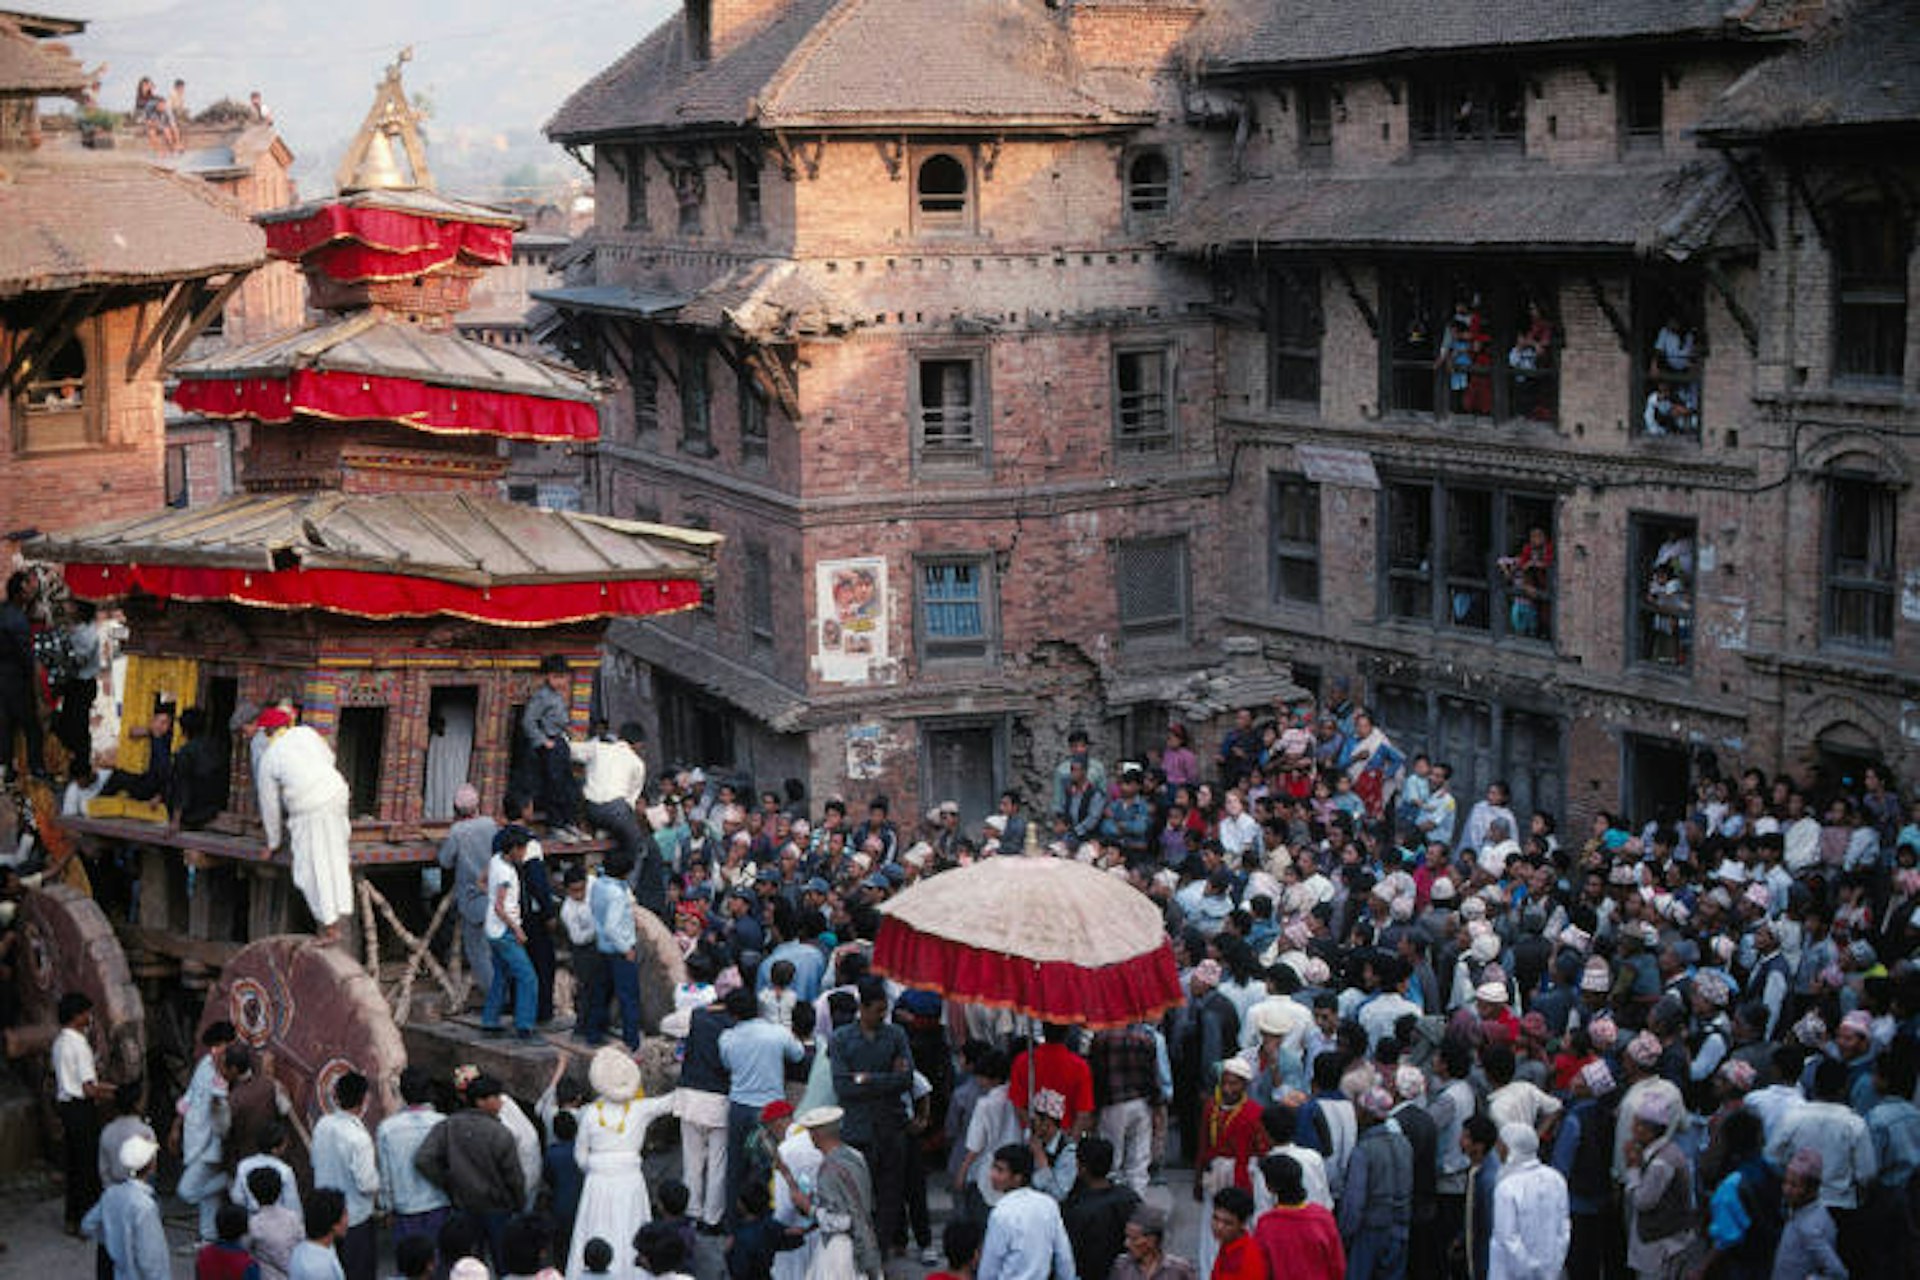 Chariot procession for Bisket Jatra festival, Bhaktapur. Image by Richard I'Anson / Getty Images.